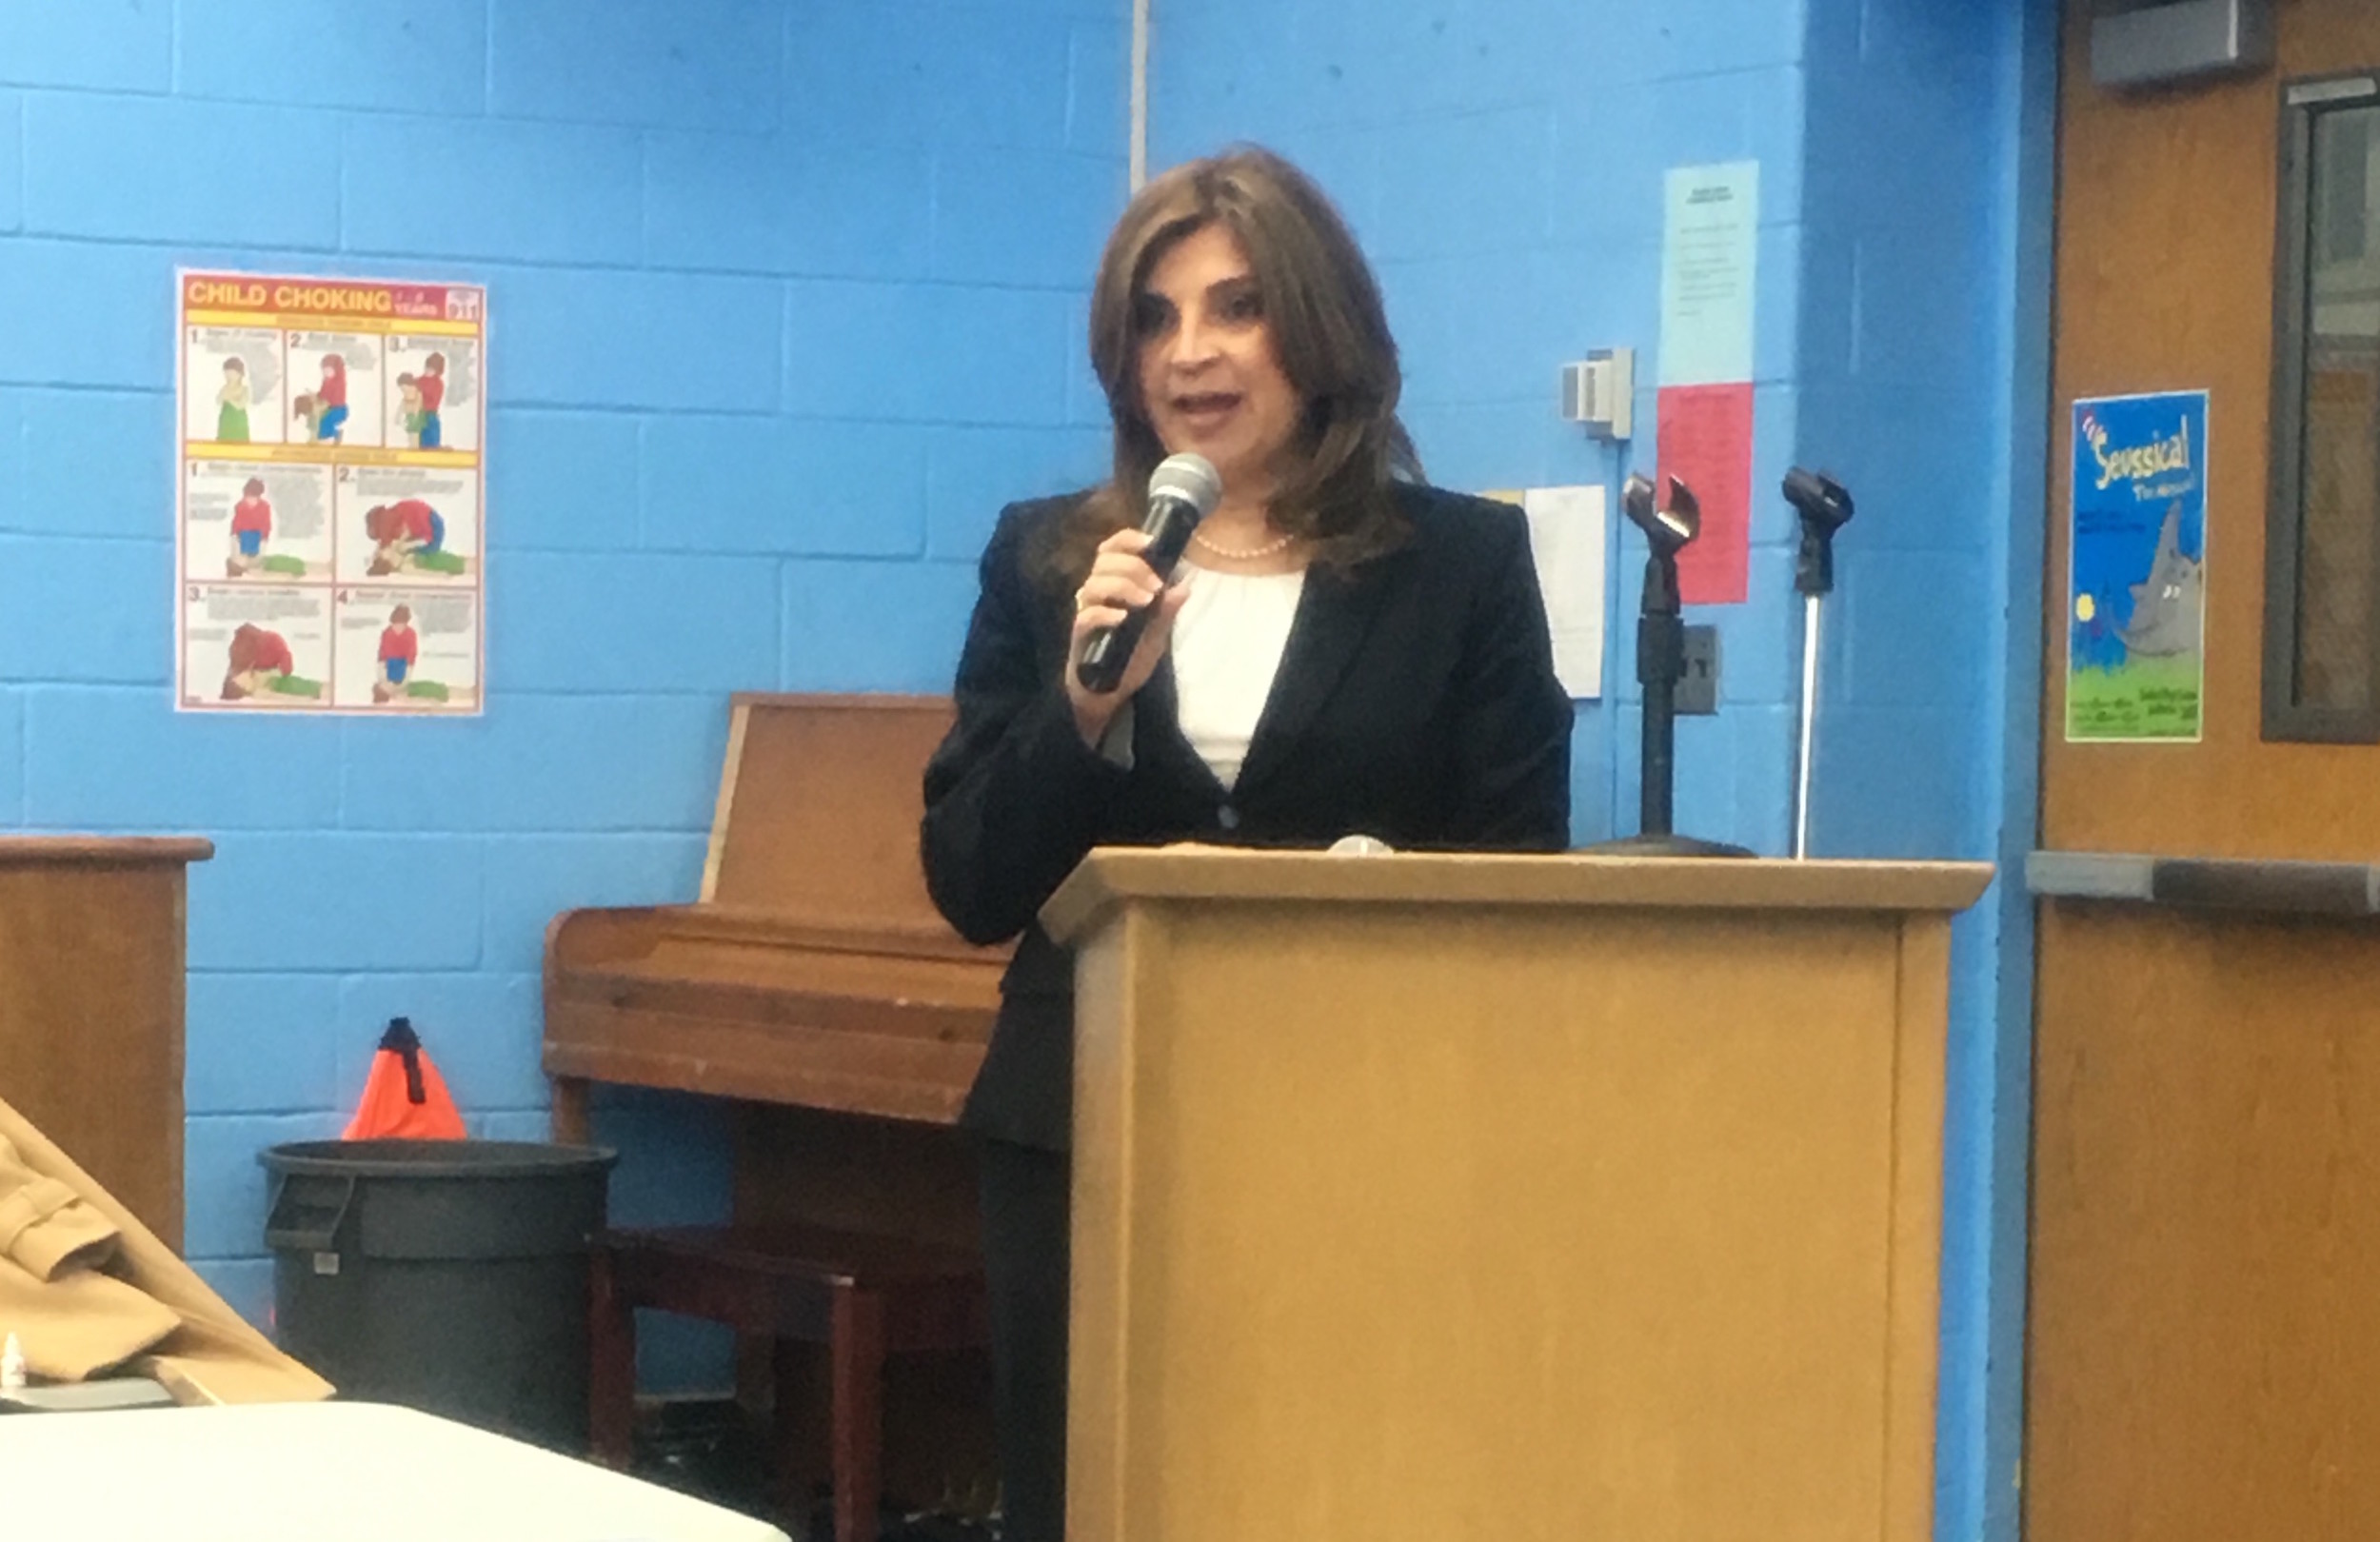 Pecora introduced herself to the community at the March 2 Board of Education meeting.